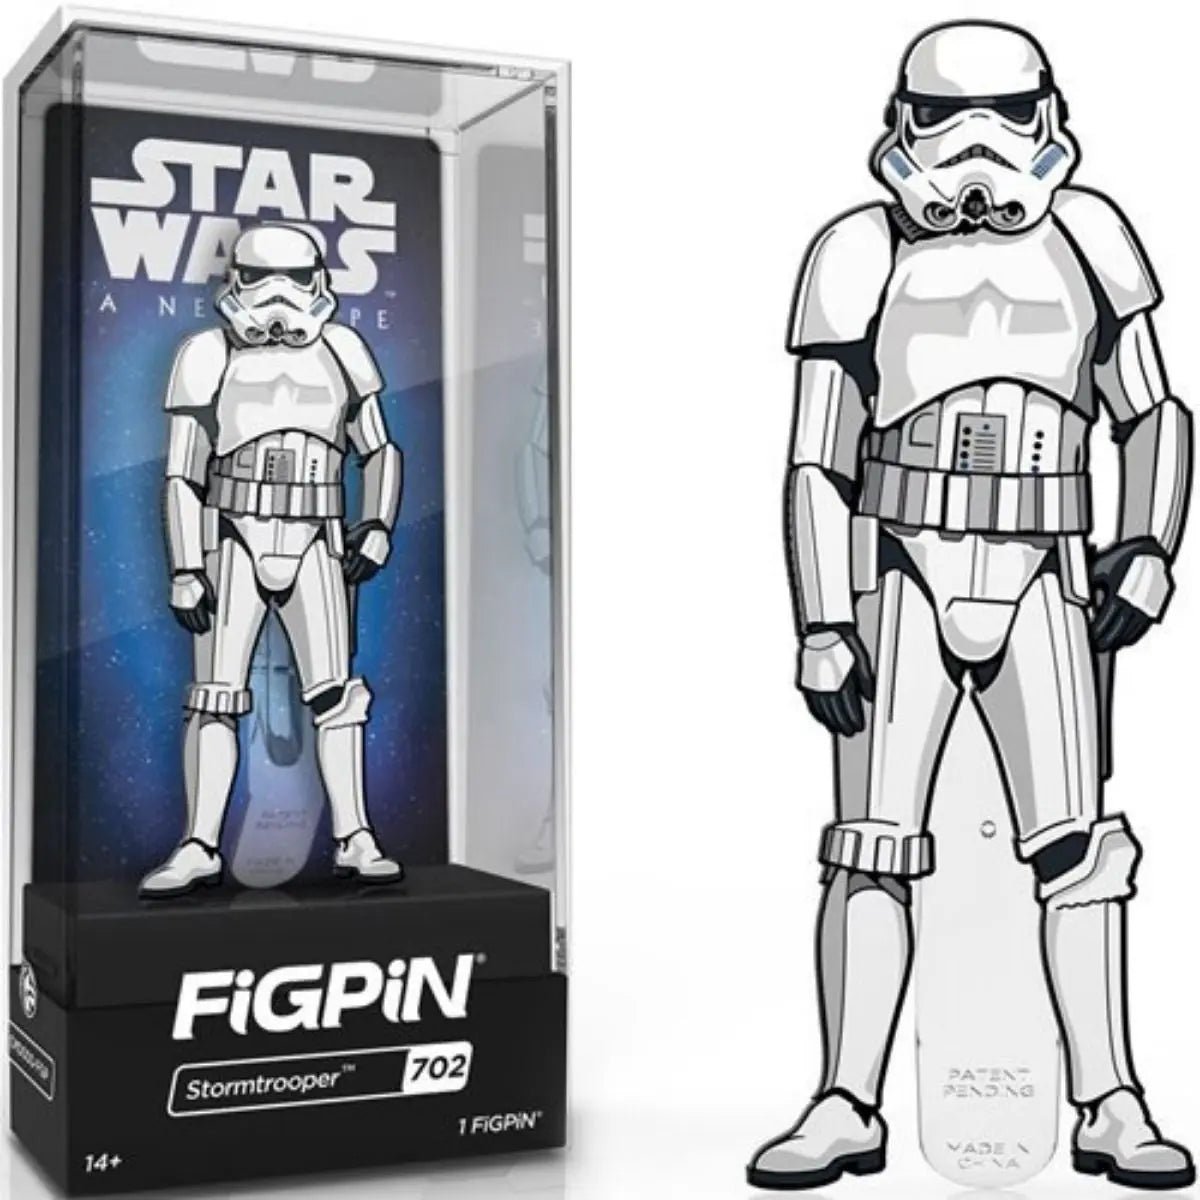 Star Wars: A New Hope Stormtrooper FiGPiN 3-Inch Enamel Pin #702 - Simon's Collectibles